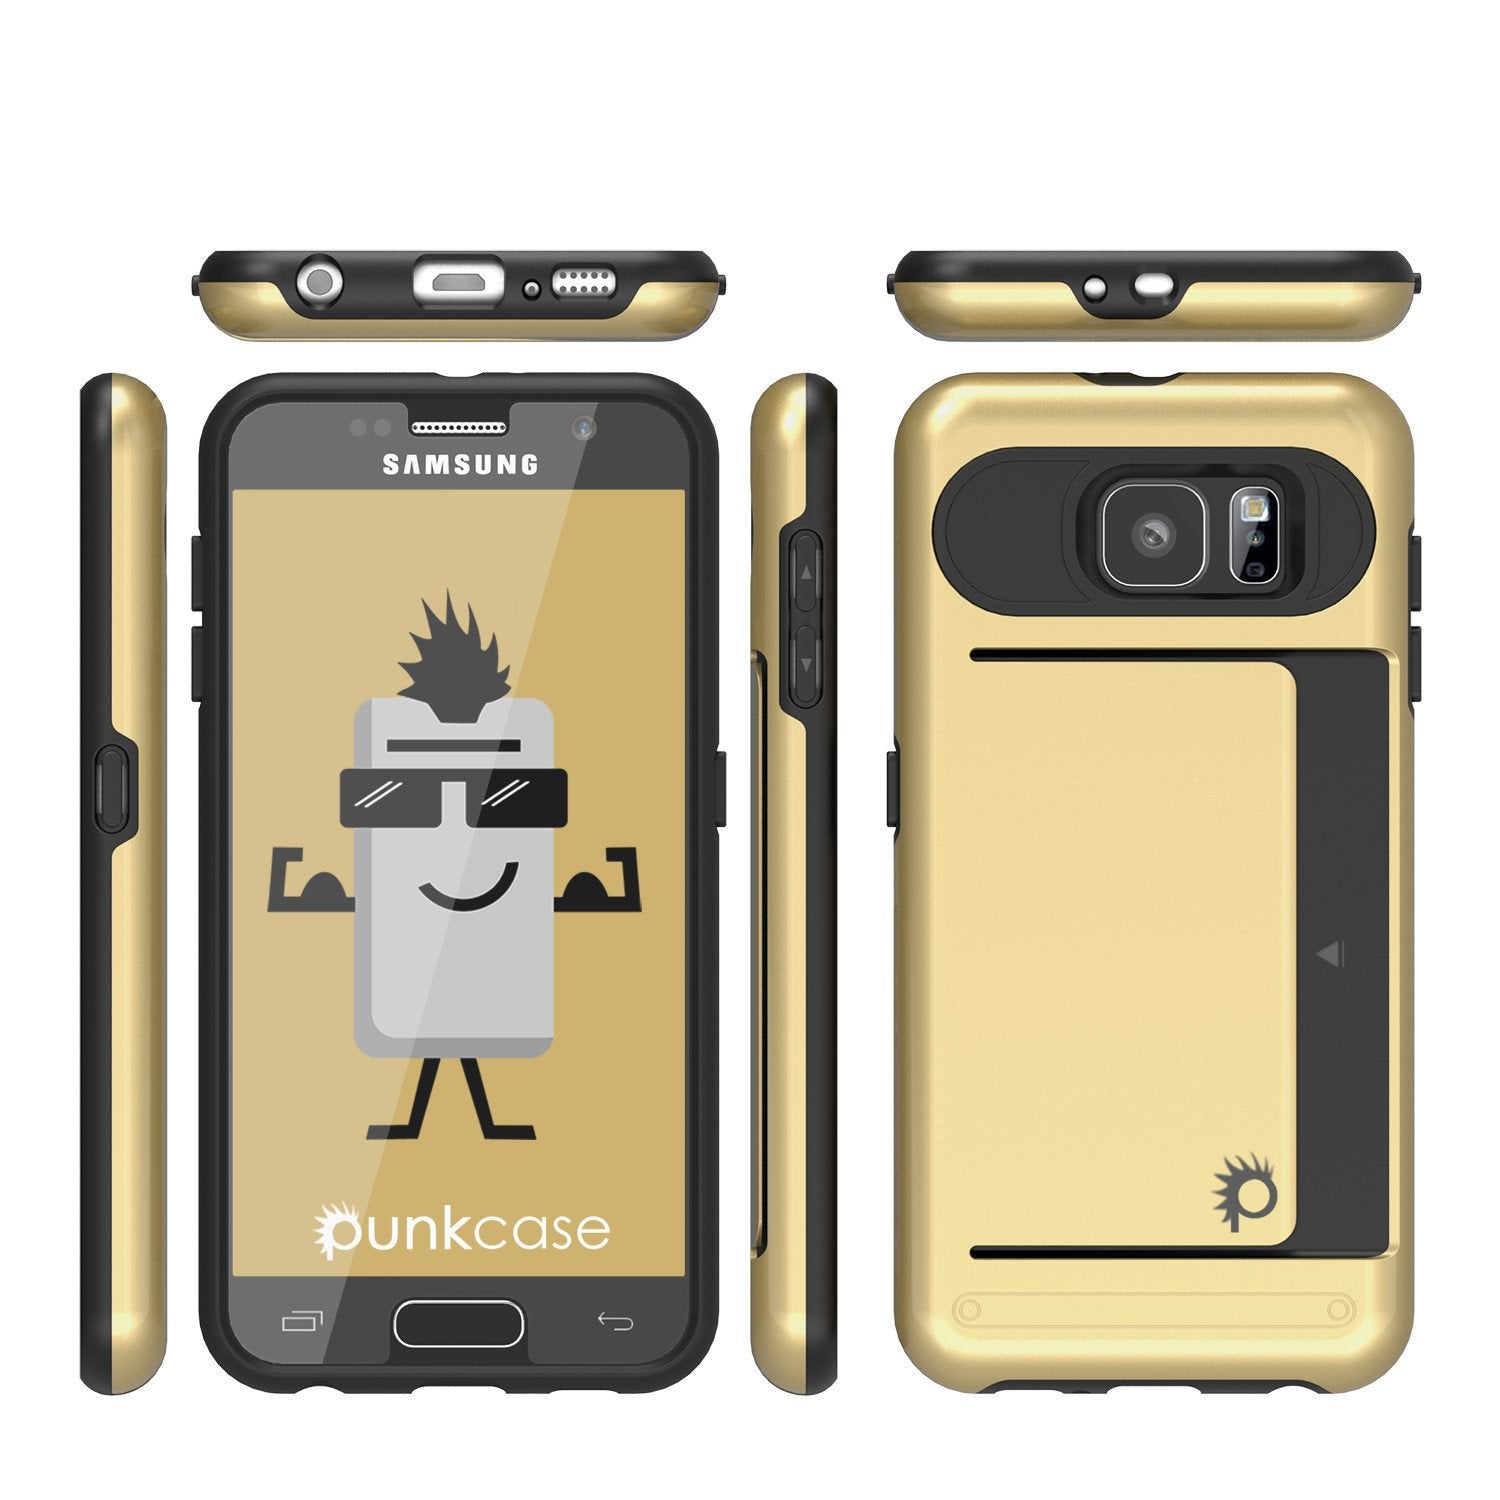 Galaxy S6 EDGE Case PunkCase CLUTCH Gold Series Slim Armor Soft Cover Case w/ Screen Protector